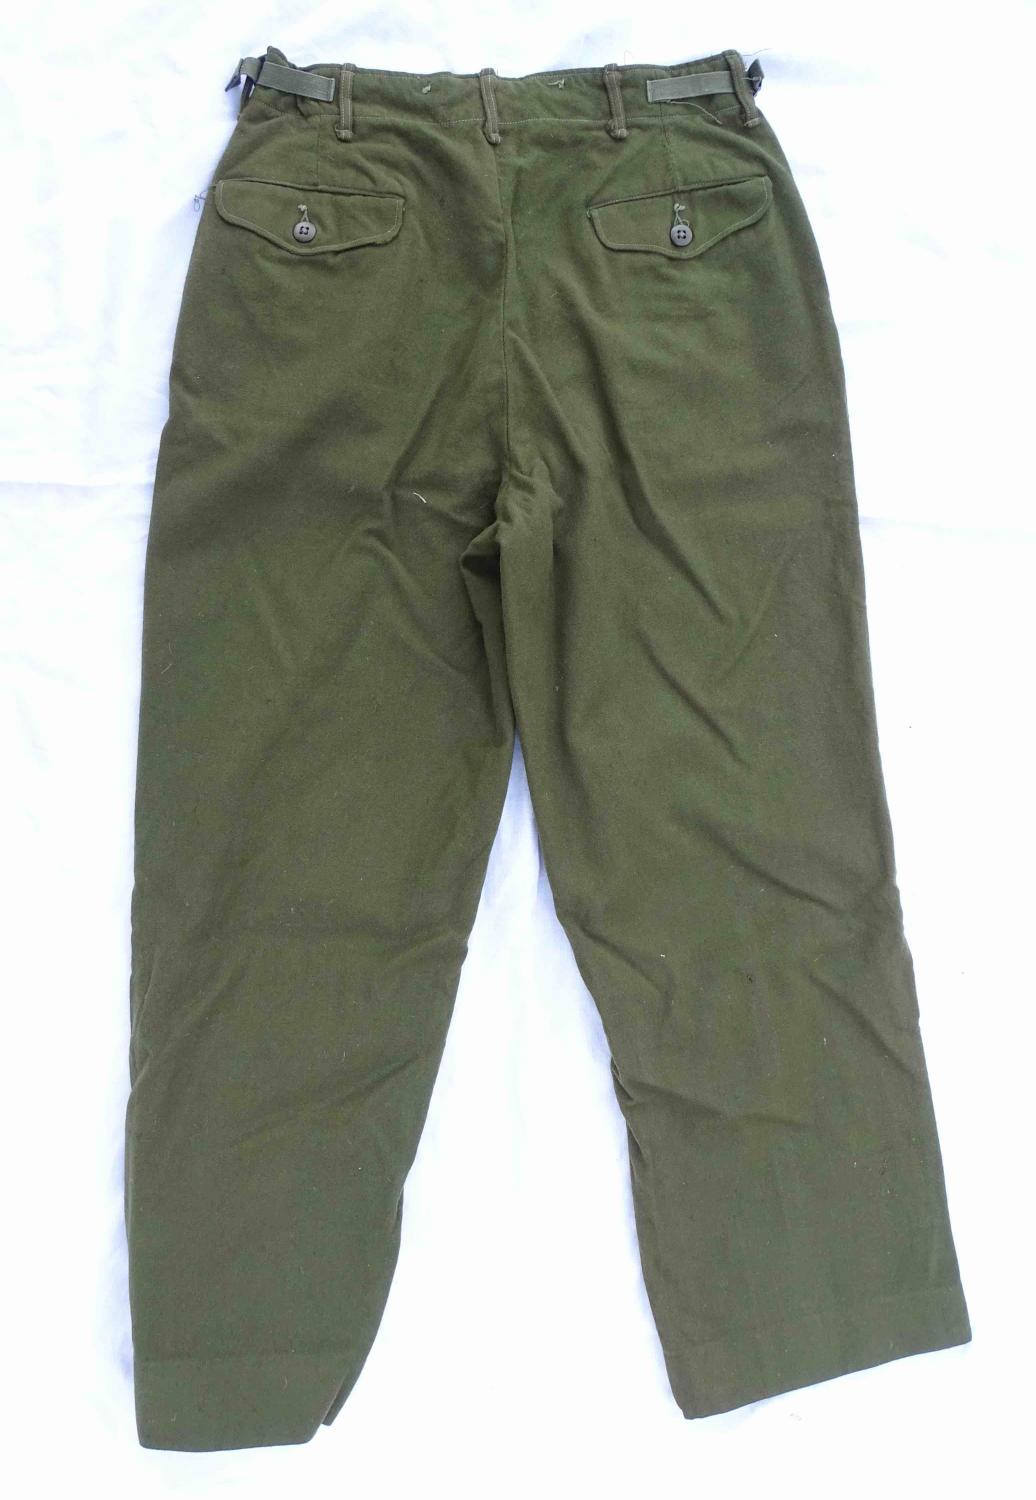 Trousers Field Wool M-1951 Cold weather. Regular Small